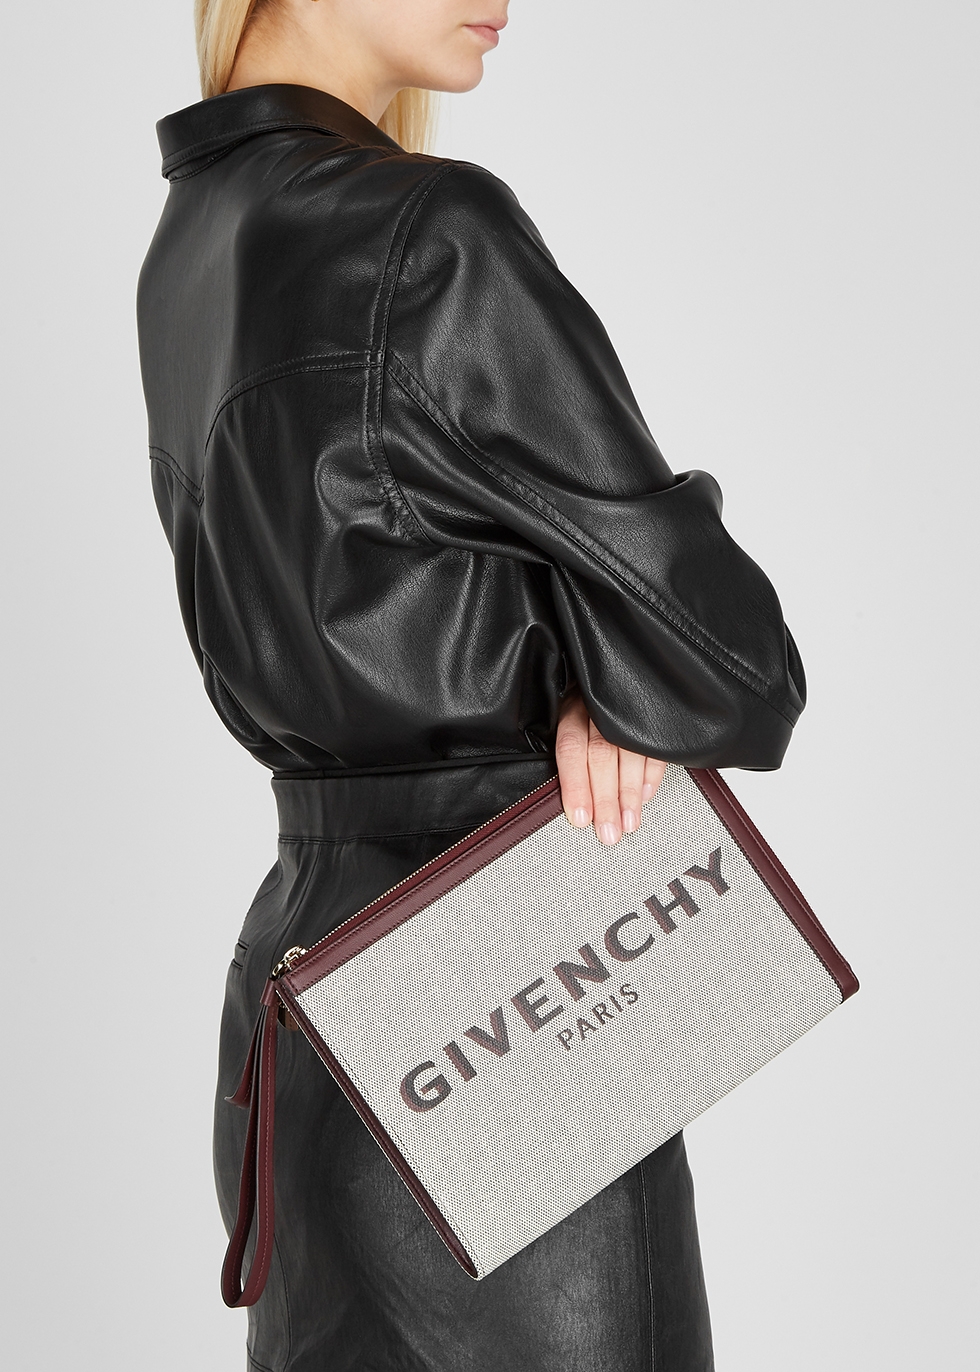 givenchy large pouch